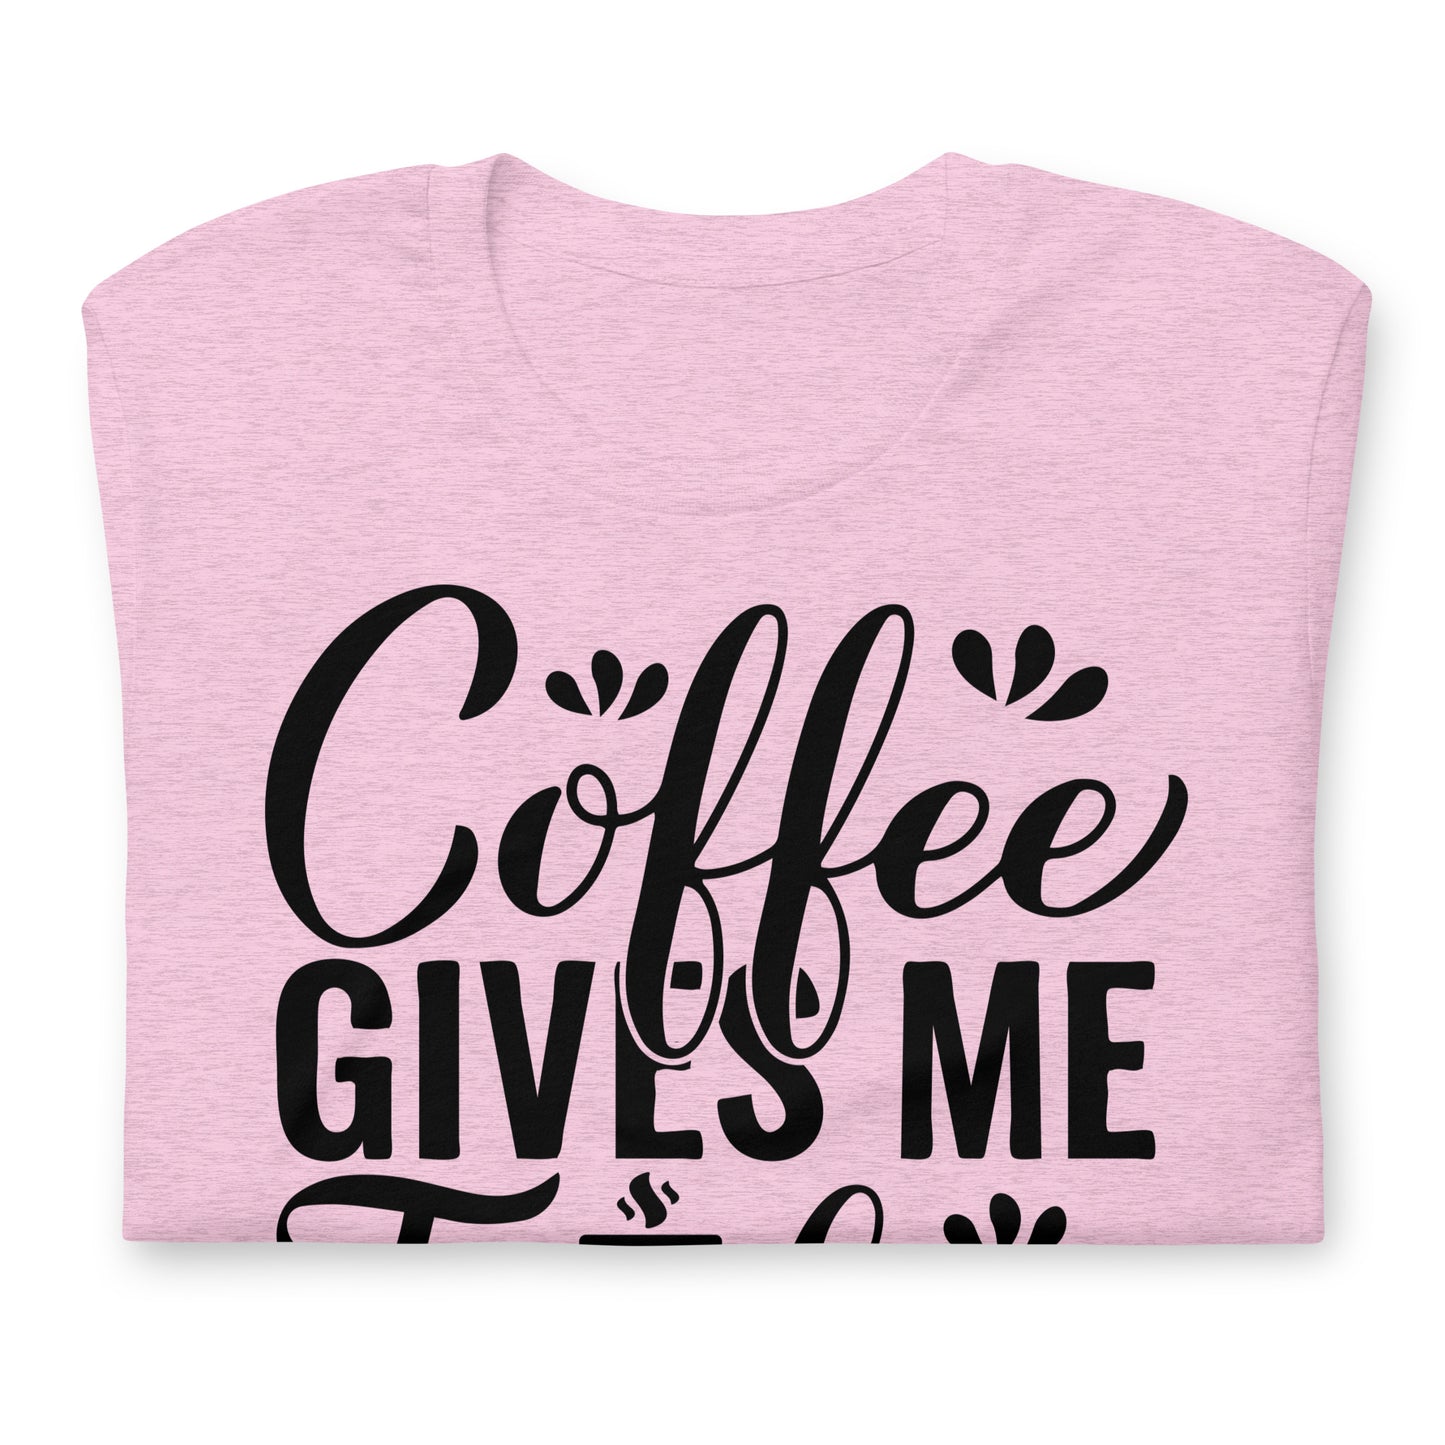 Coffee Gives Me Teacher Powers Quality Cotton Bella Canvas Adult T-Shirt